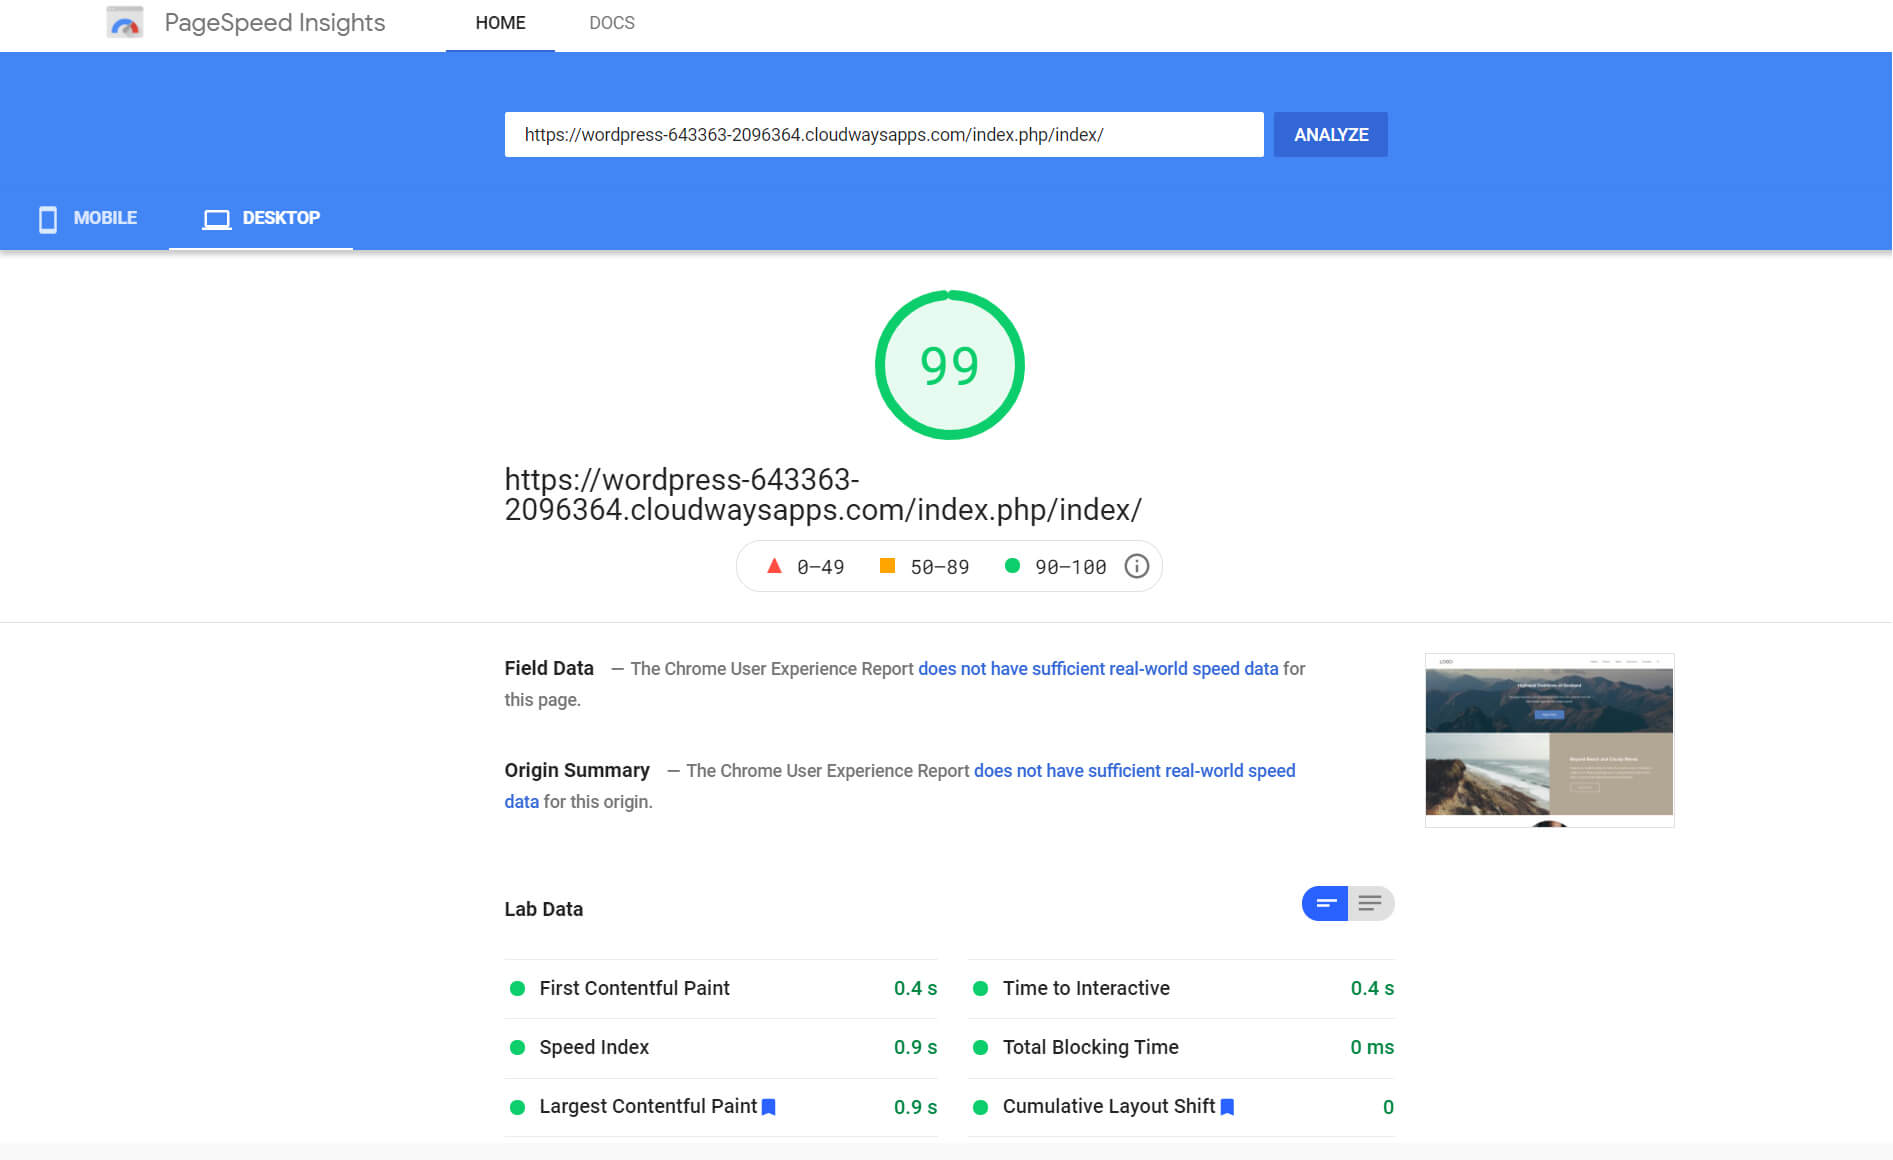 Cloudways performance on PageSpeed